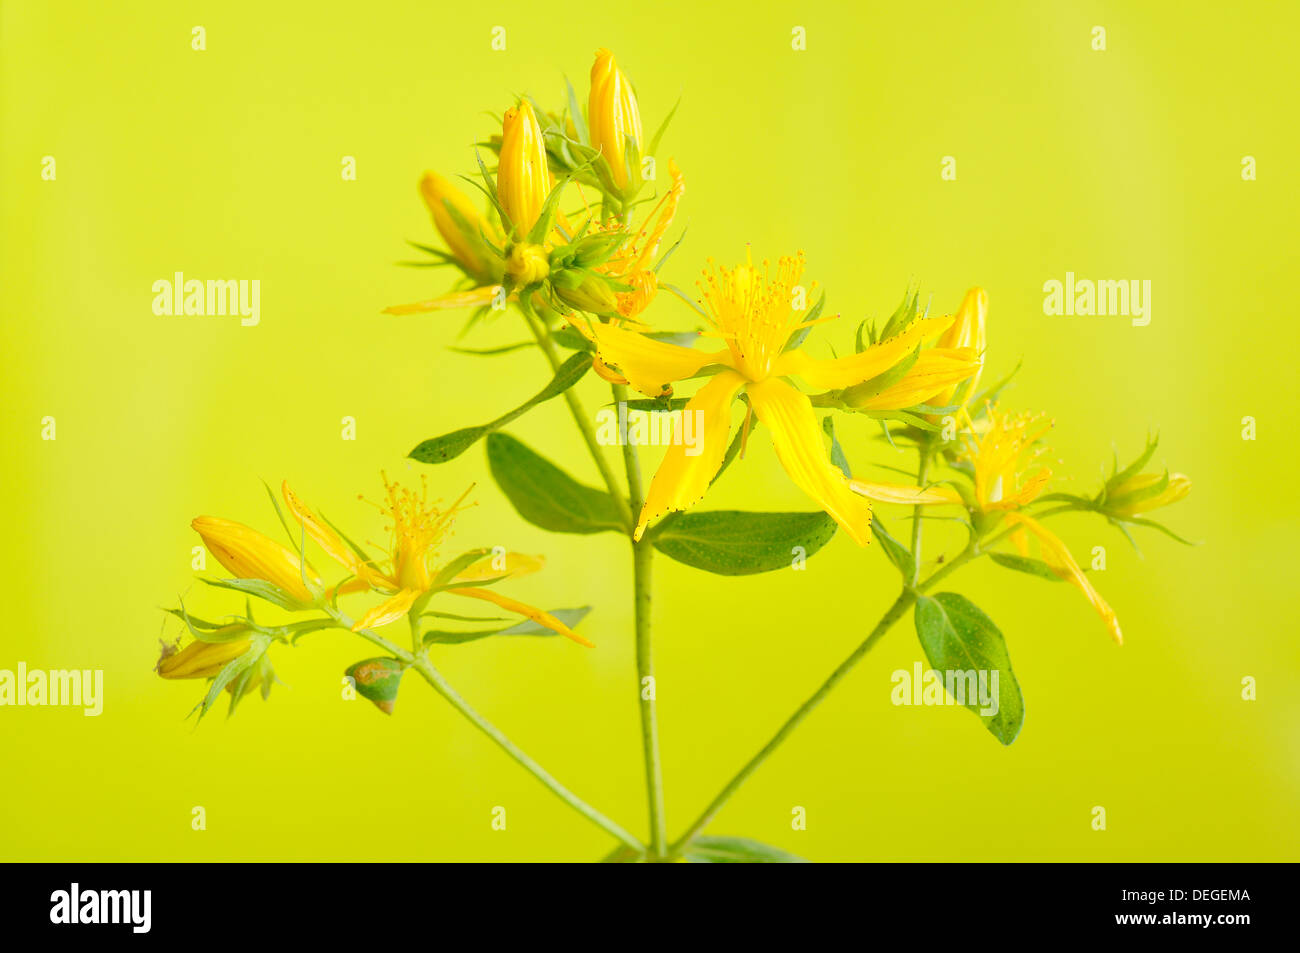 St John's wort, Hypericum perforatum, horizontal portrait of flowers with out of focus background. Stock Photo